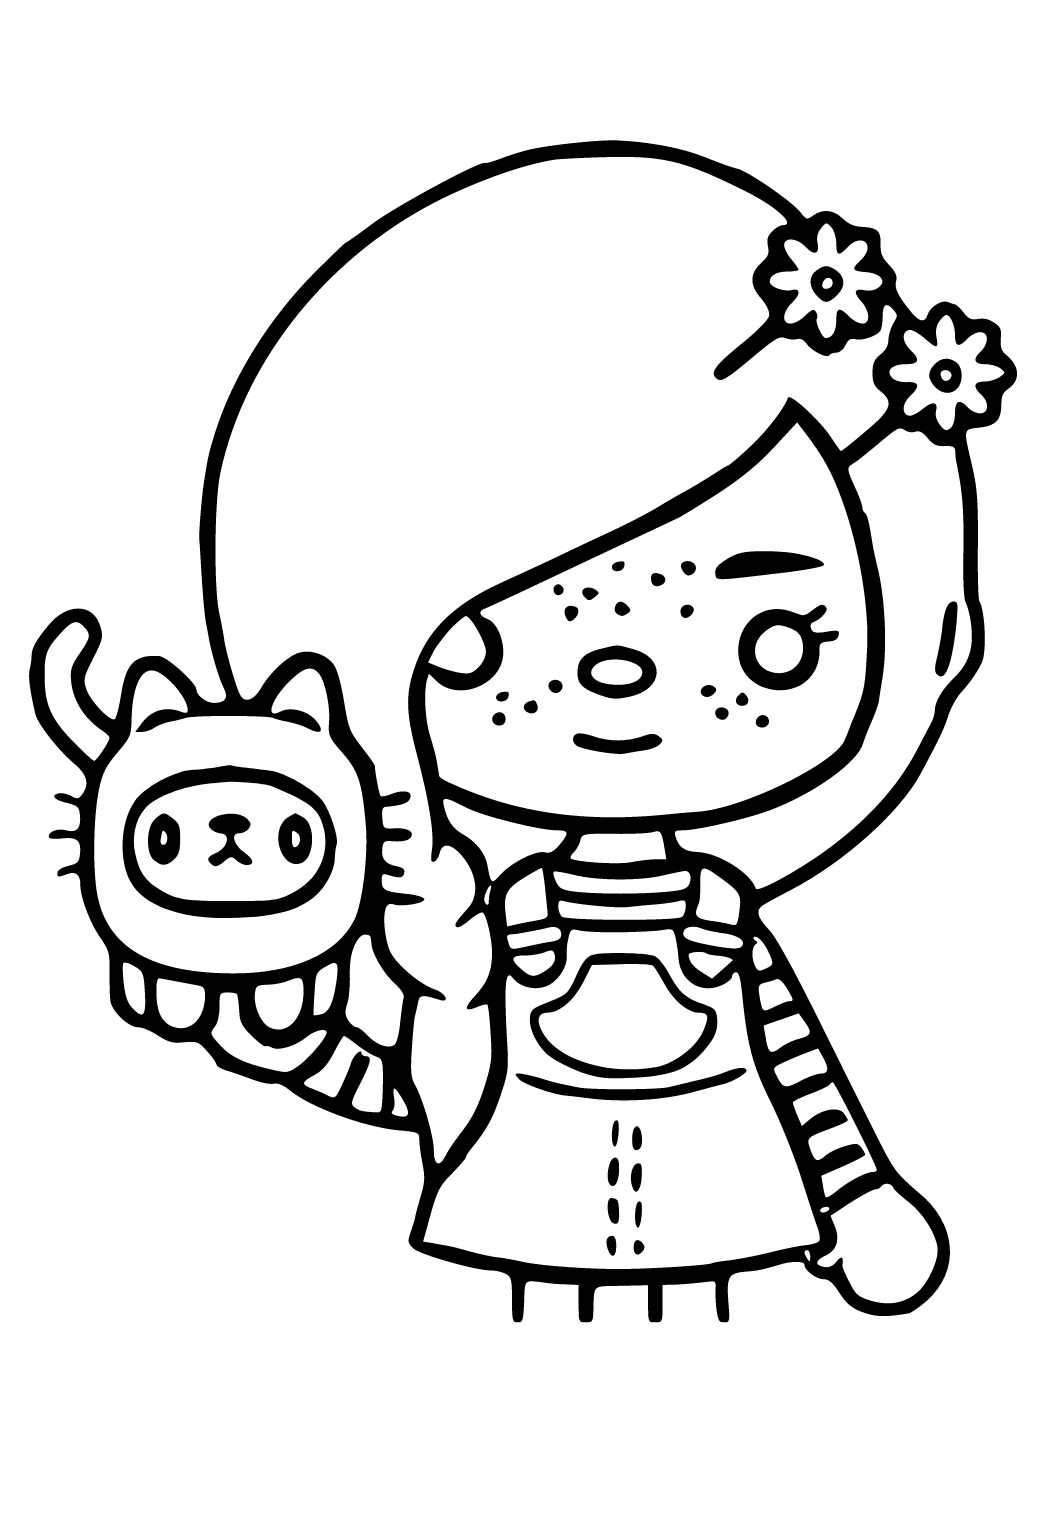 Toca Boca Coloring Book : Meaningful Gift For Kids Toca Boca and